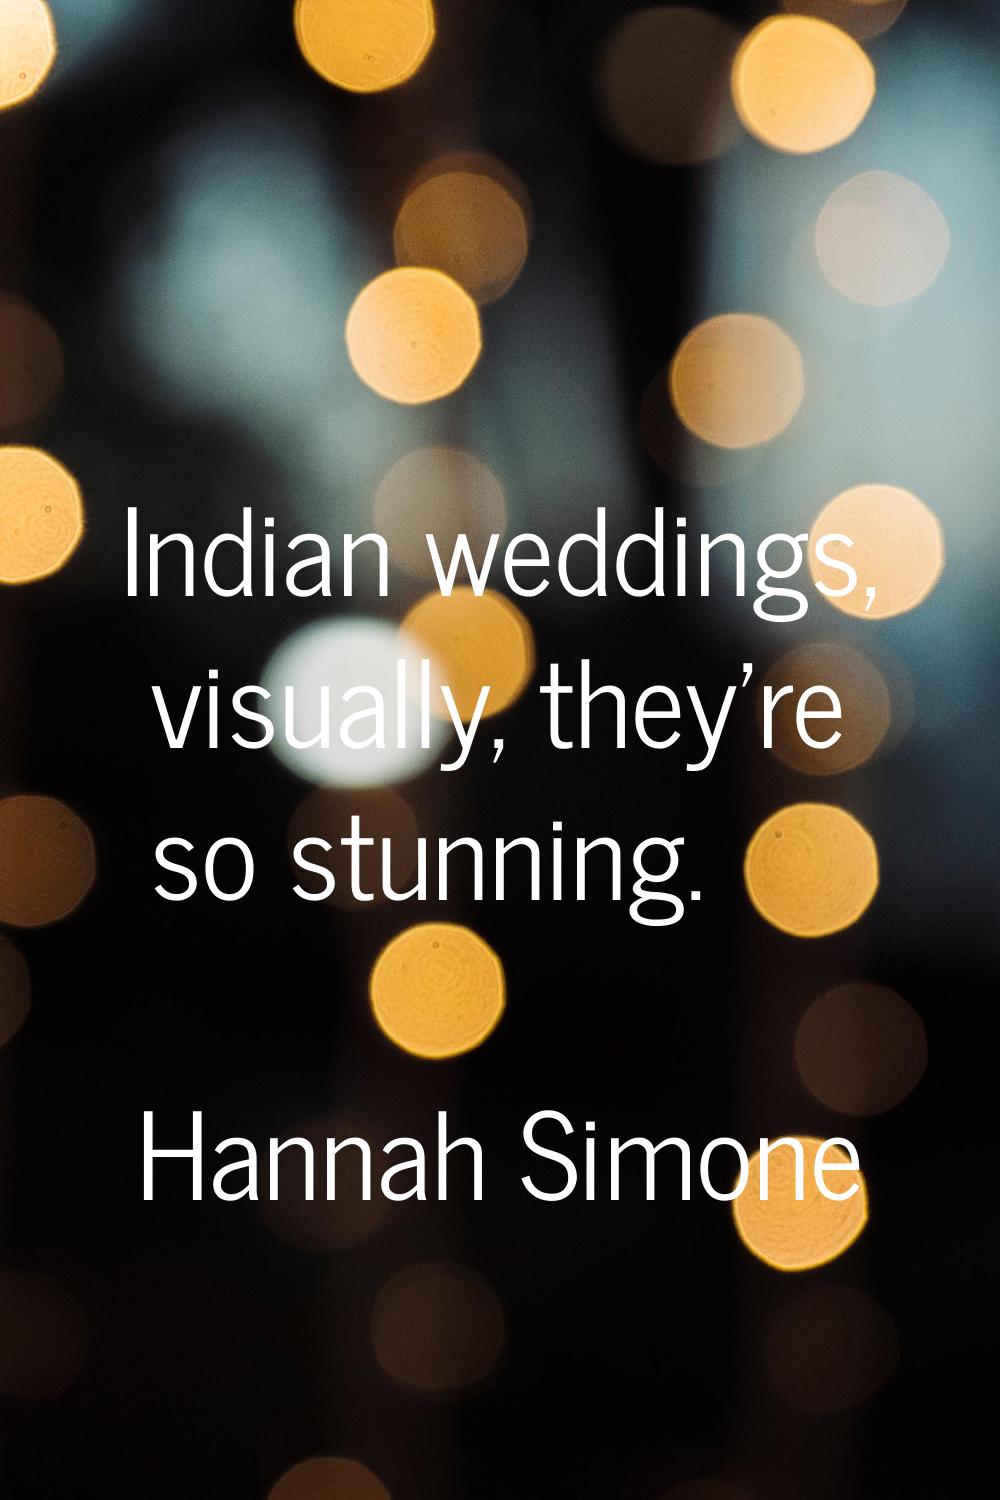 Indian weddings, visually, they're so stunning.